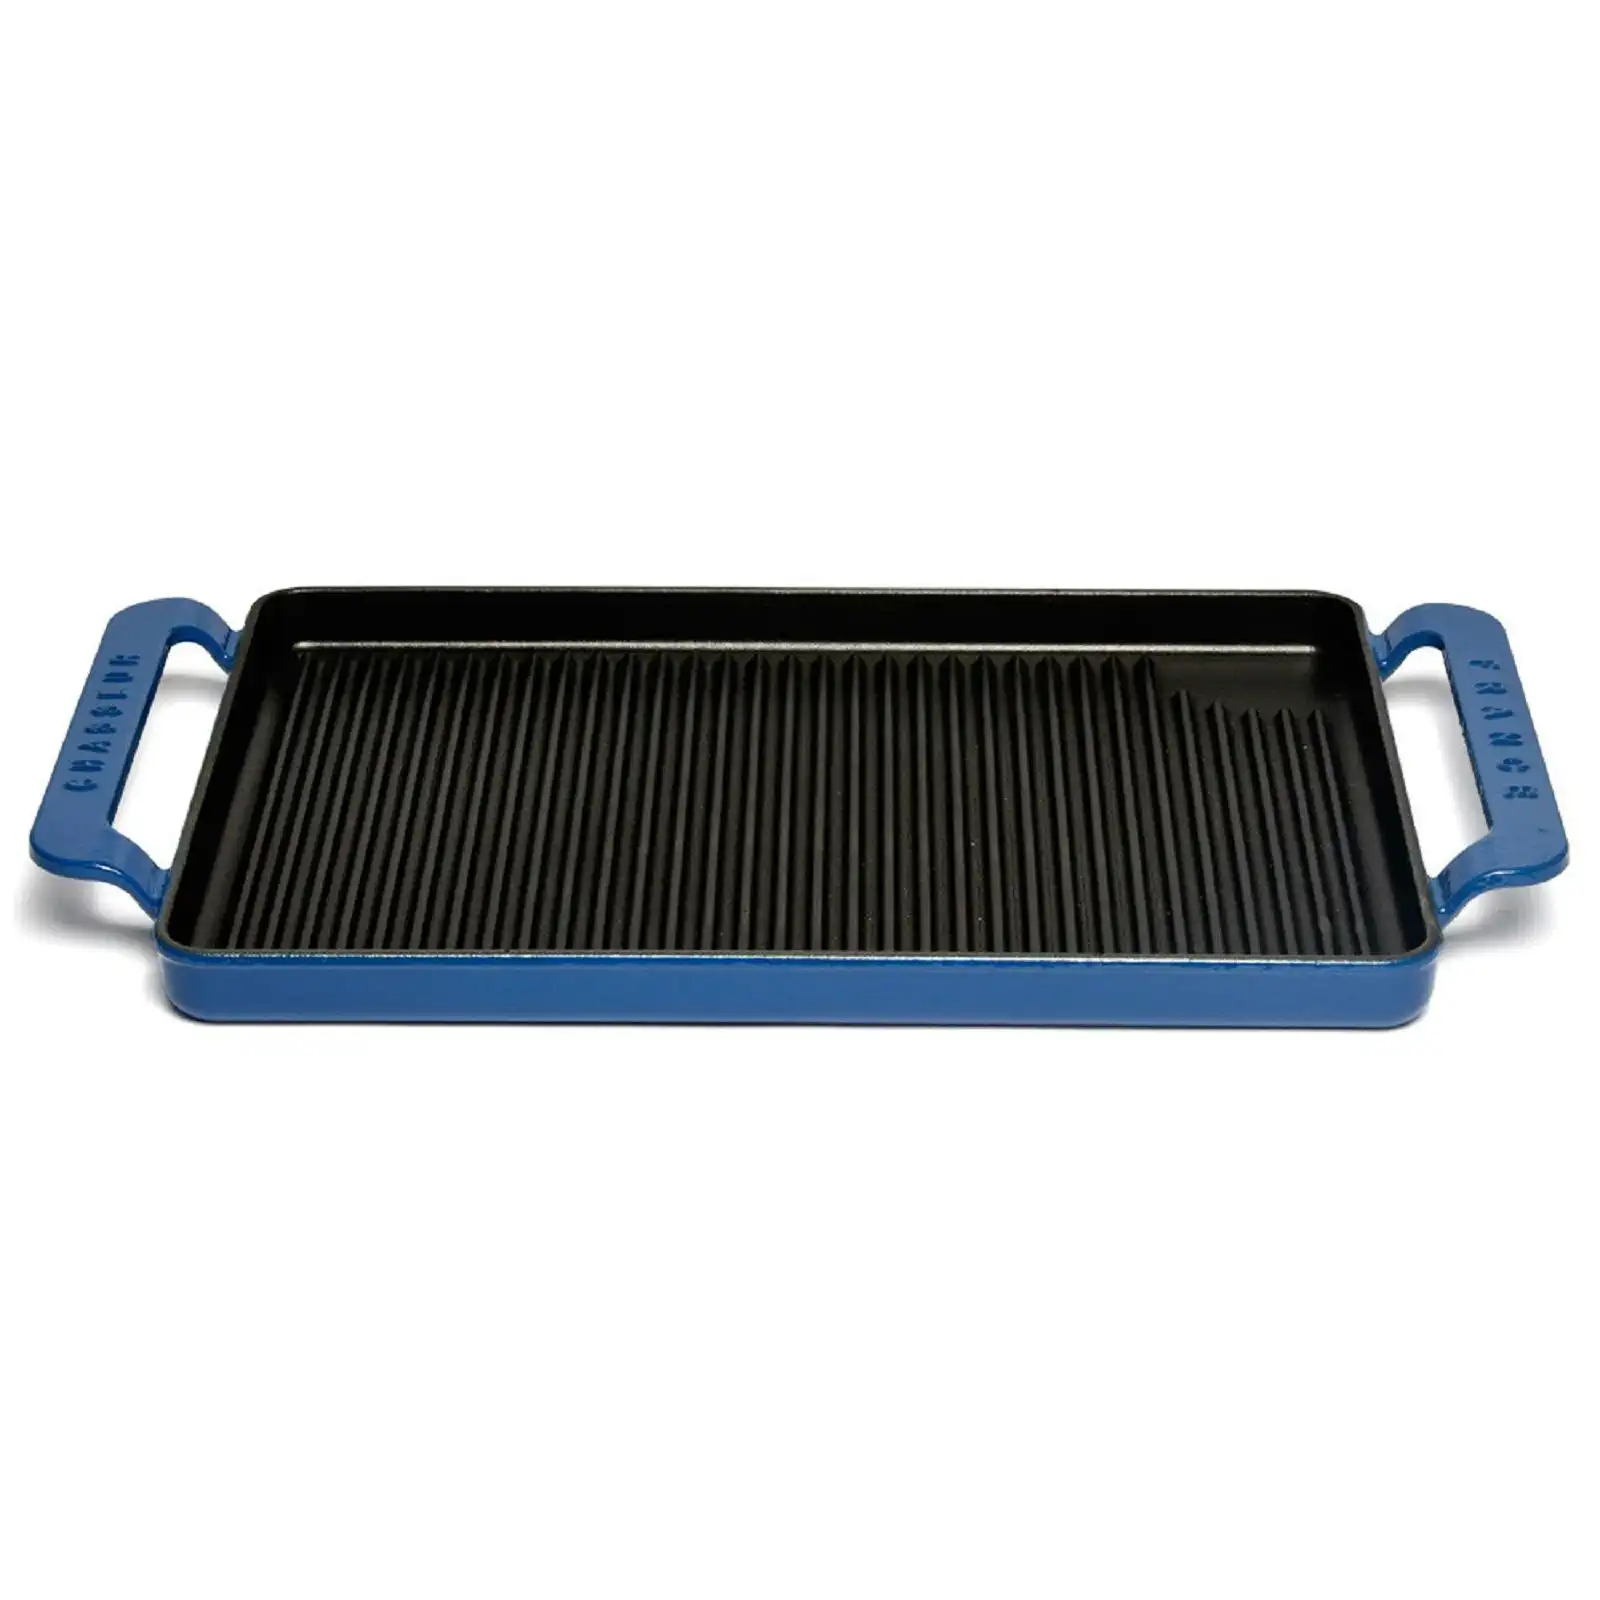 Chasseur SKY BLUE 42 x 24cm CAST IRON RECTANGULAR GRILL TRAY